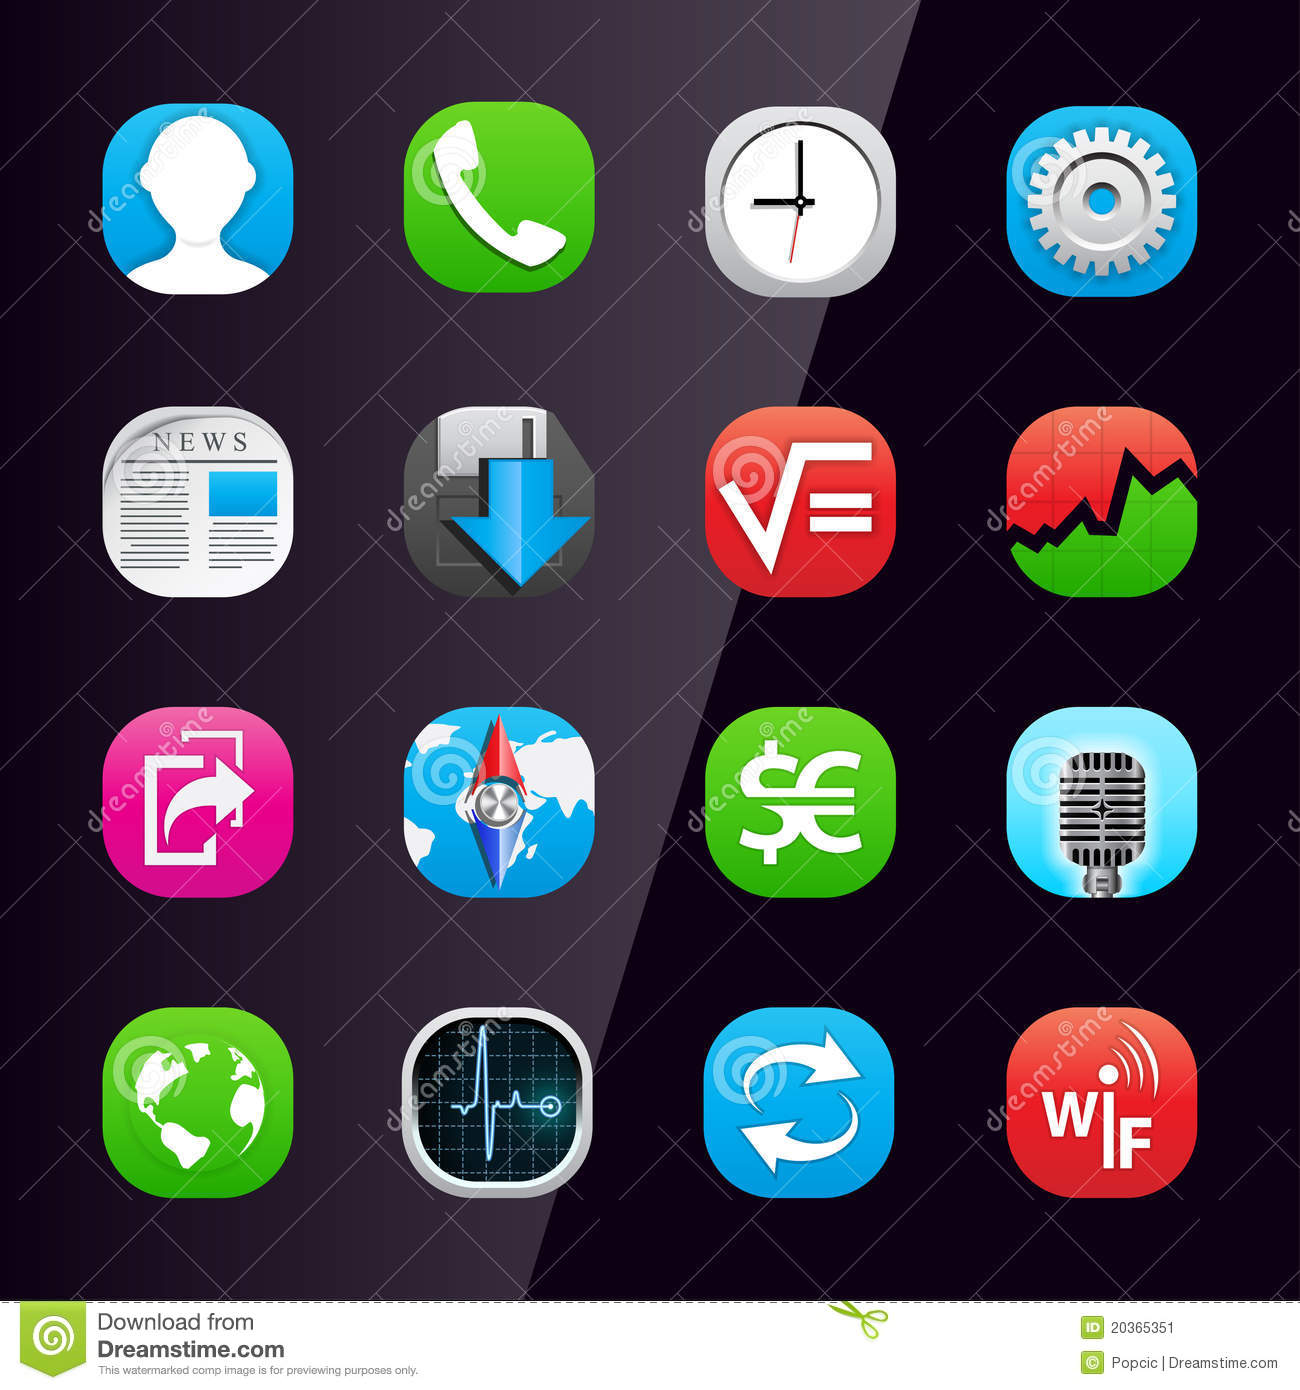 Mobile Phone App Icons